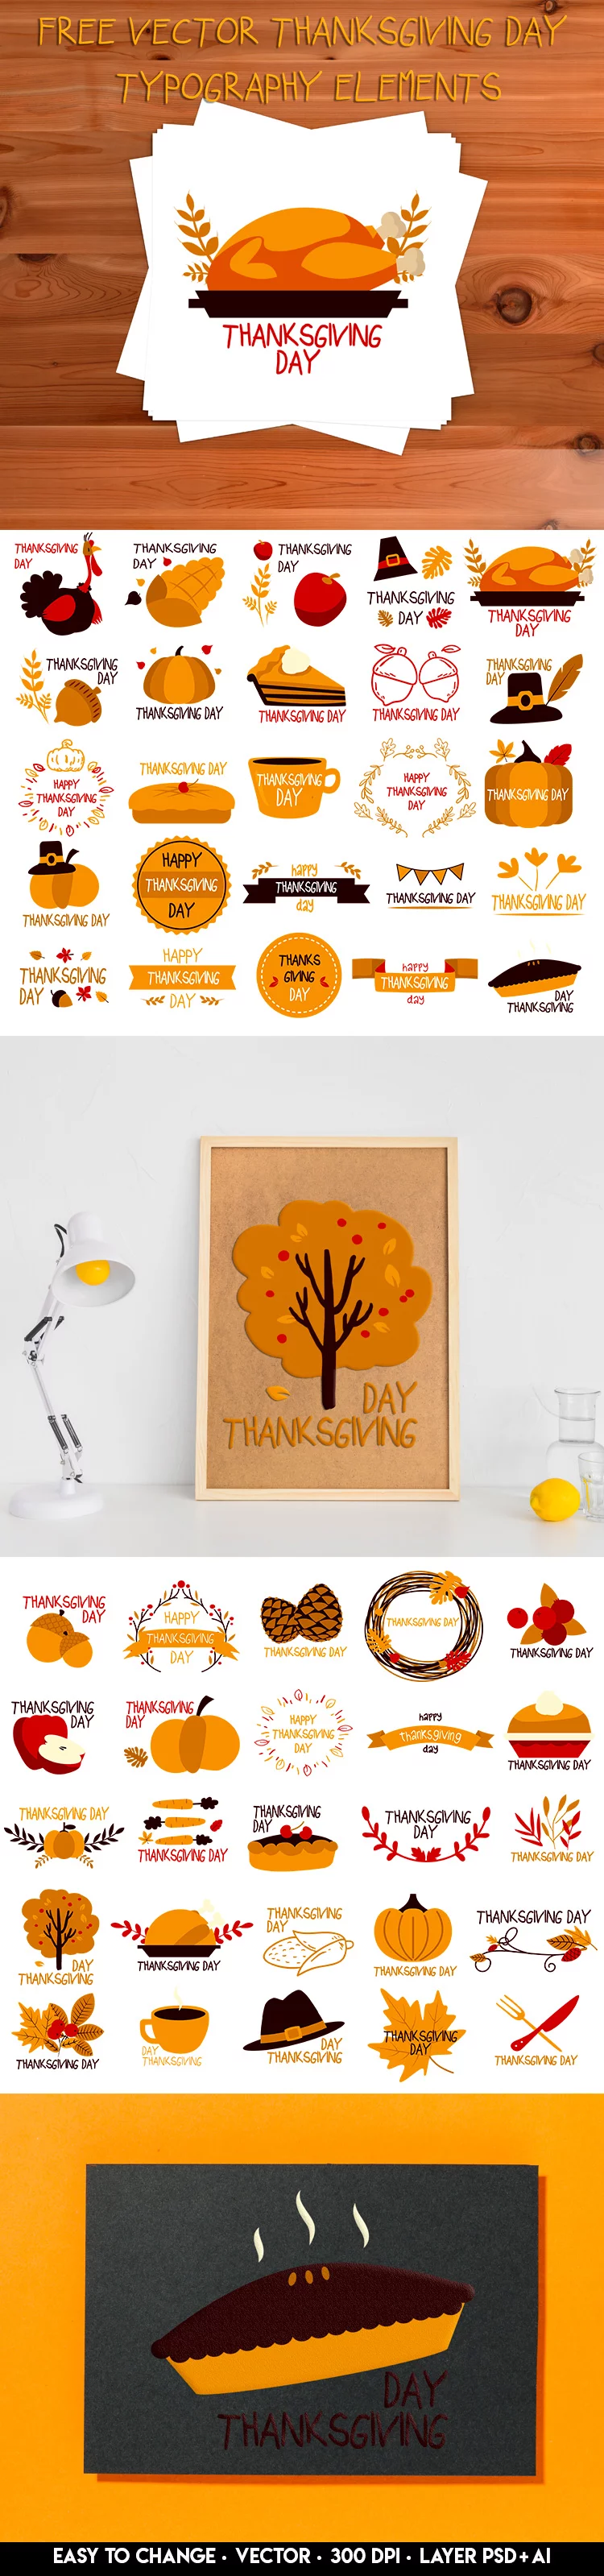 Free Vector Thanksgiving Day Typography Elements